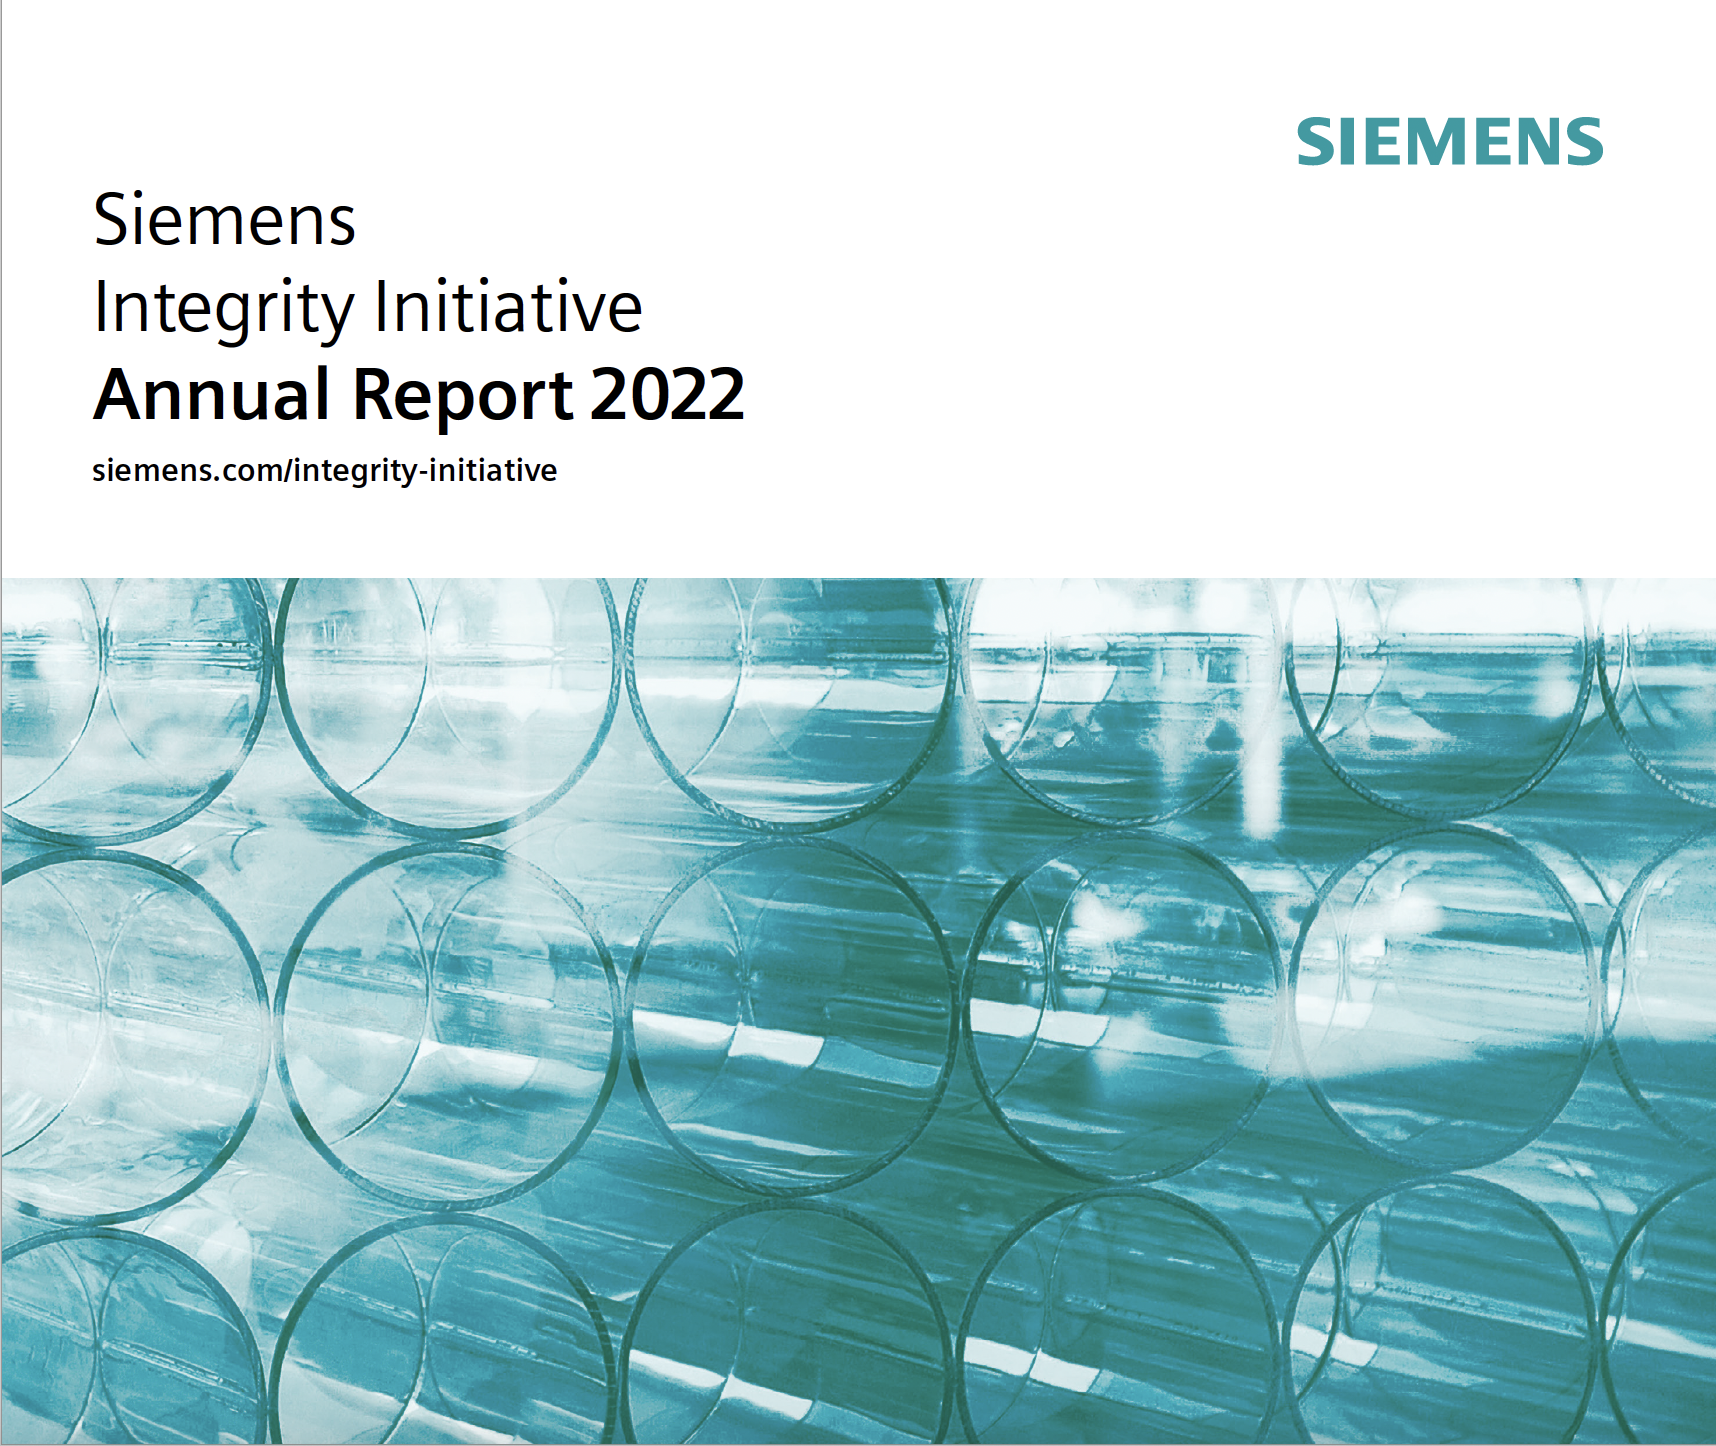 2022 Annual Report of the Siemens Integrity Initiative